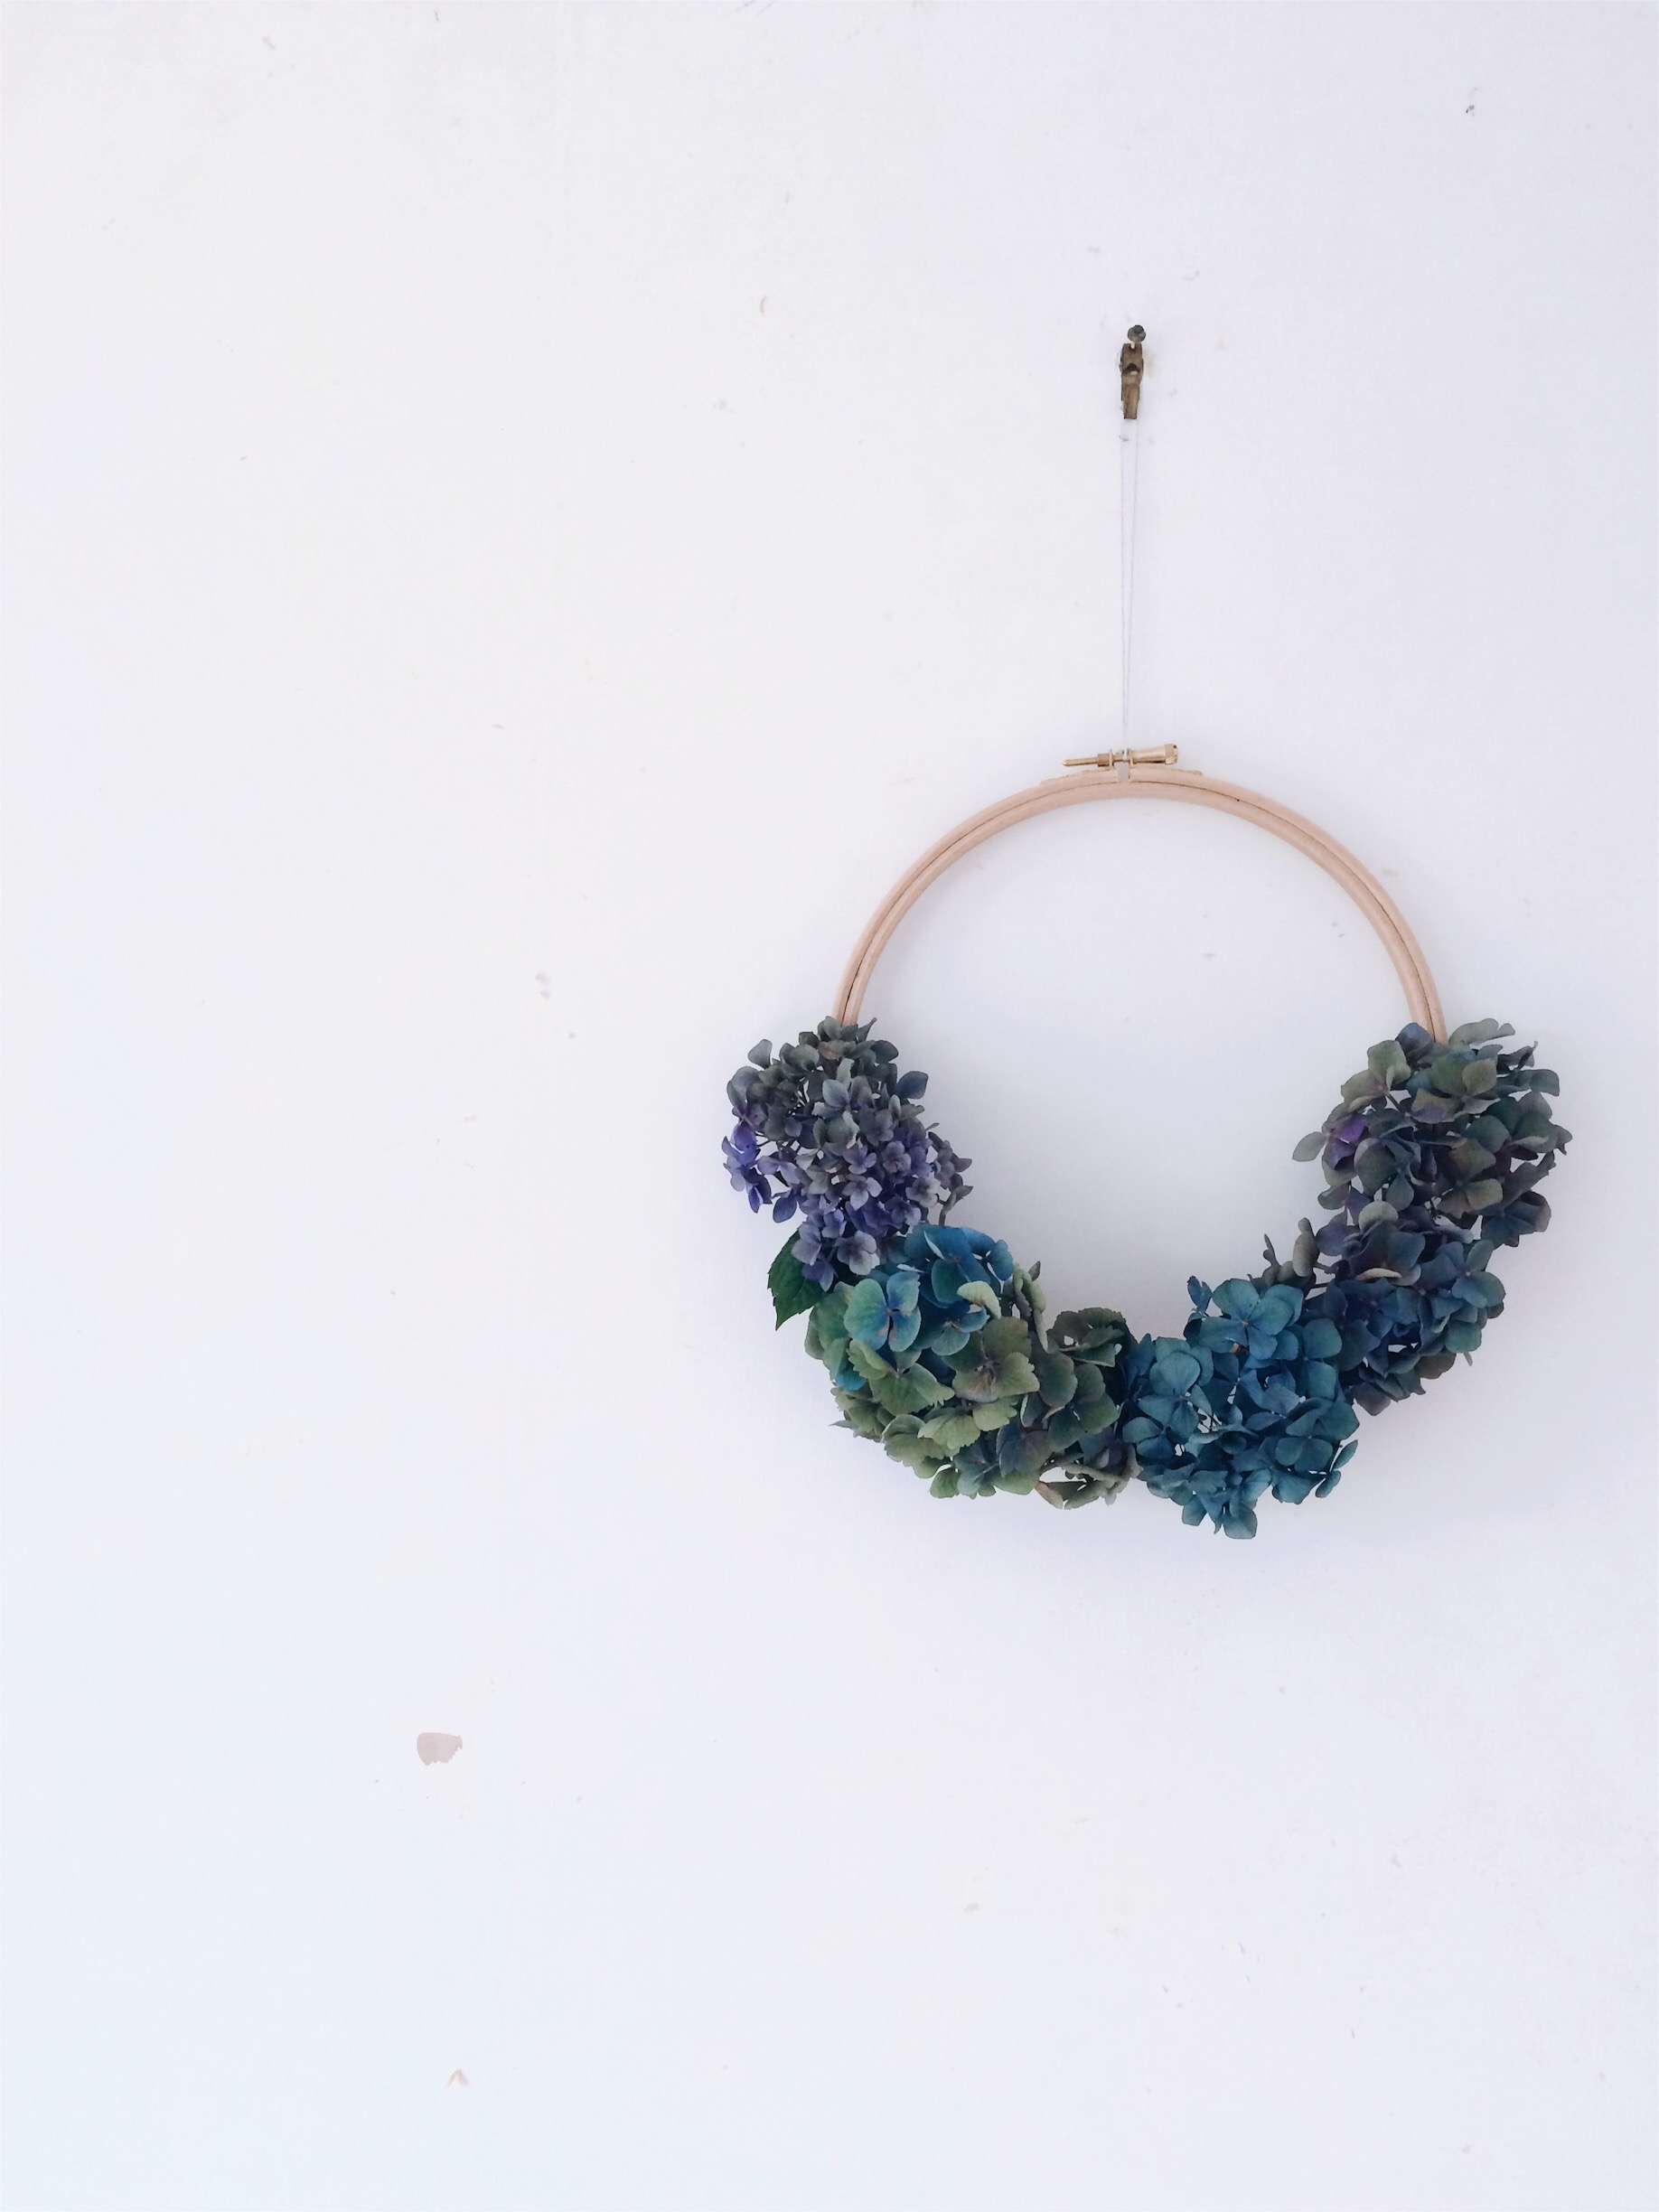 Finished hydrangea wreath hanging on wall